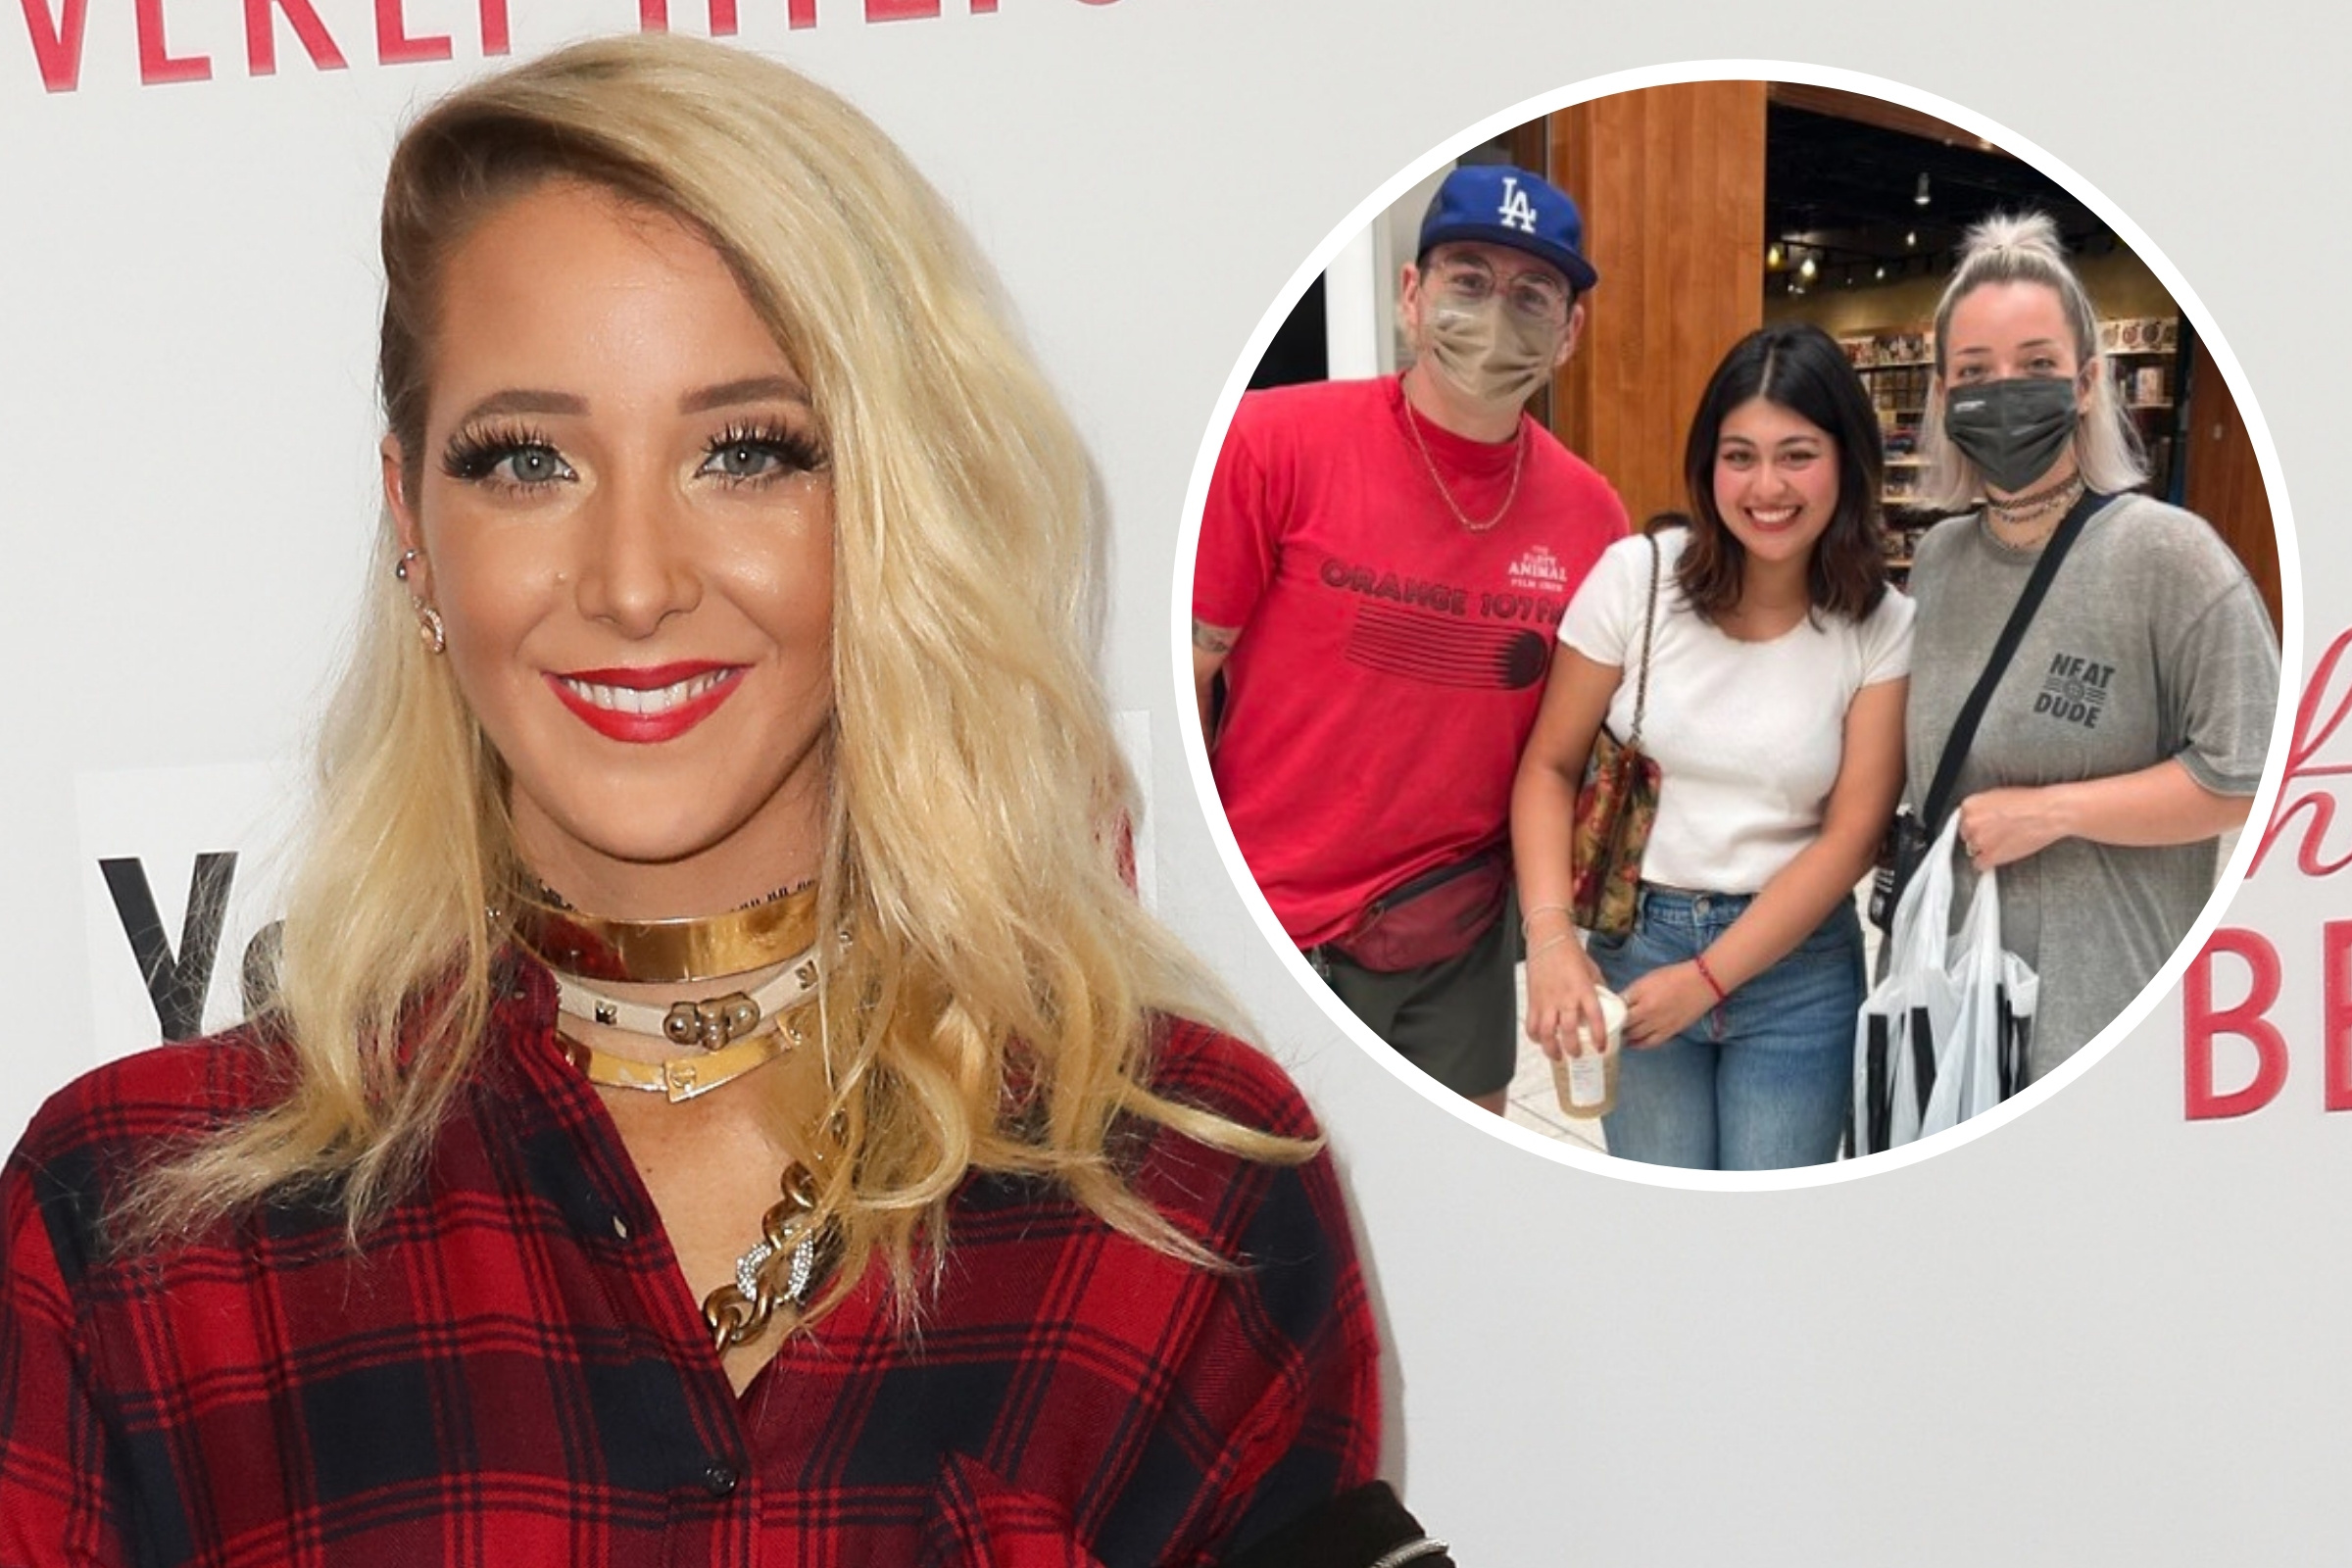 Jenna Marbles Fan Photo Sparks Pleas for Star To Come Back Online